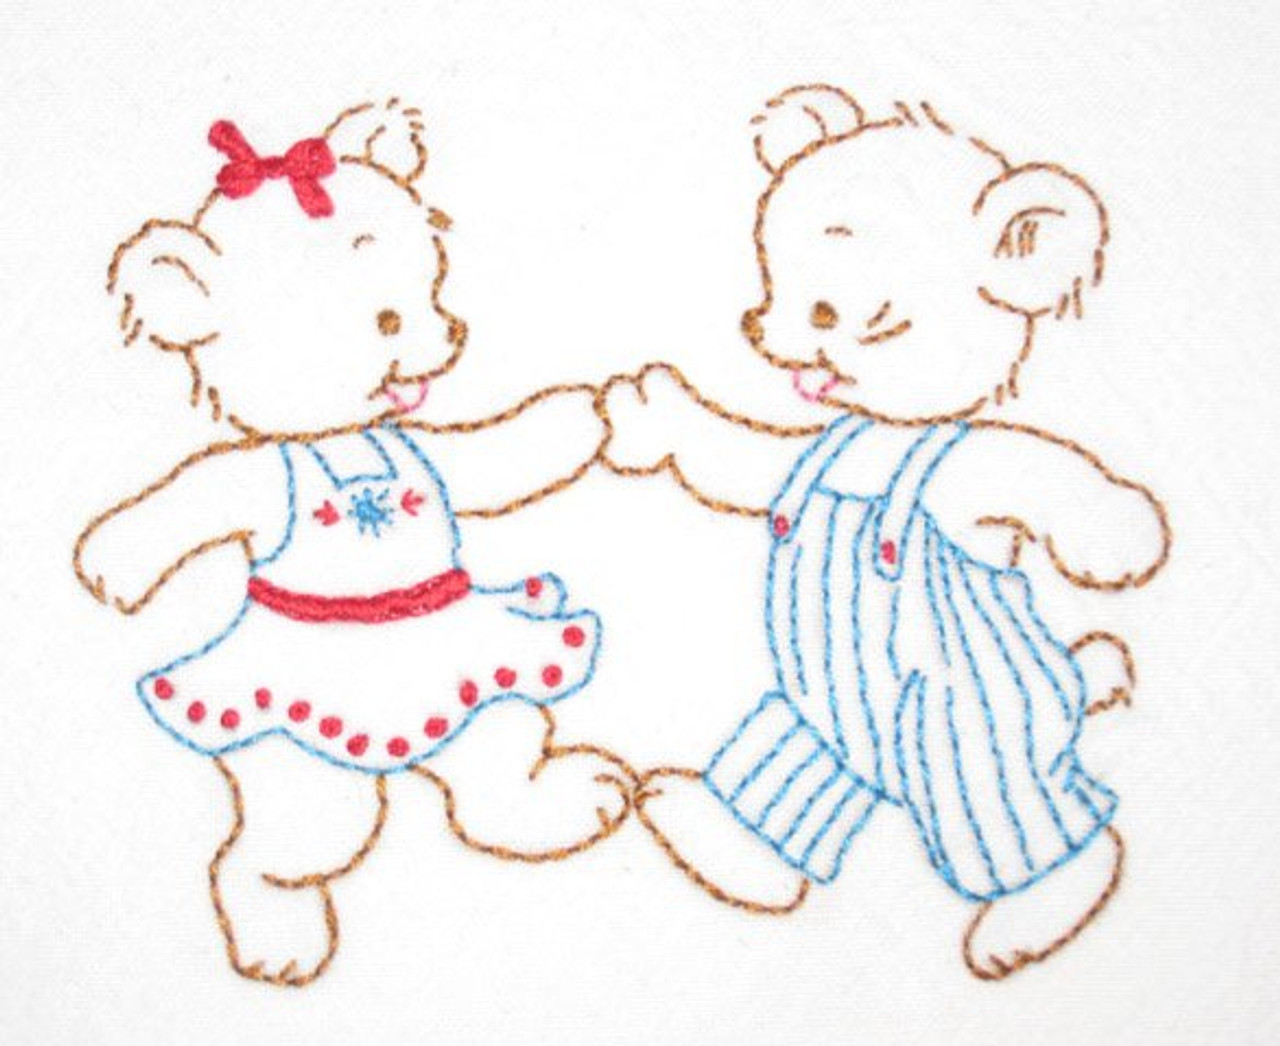 BLACK BEAR FAMILY NEW SET OF 2 HAND TOWELS EMBROIDERED BY LAURA